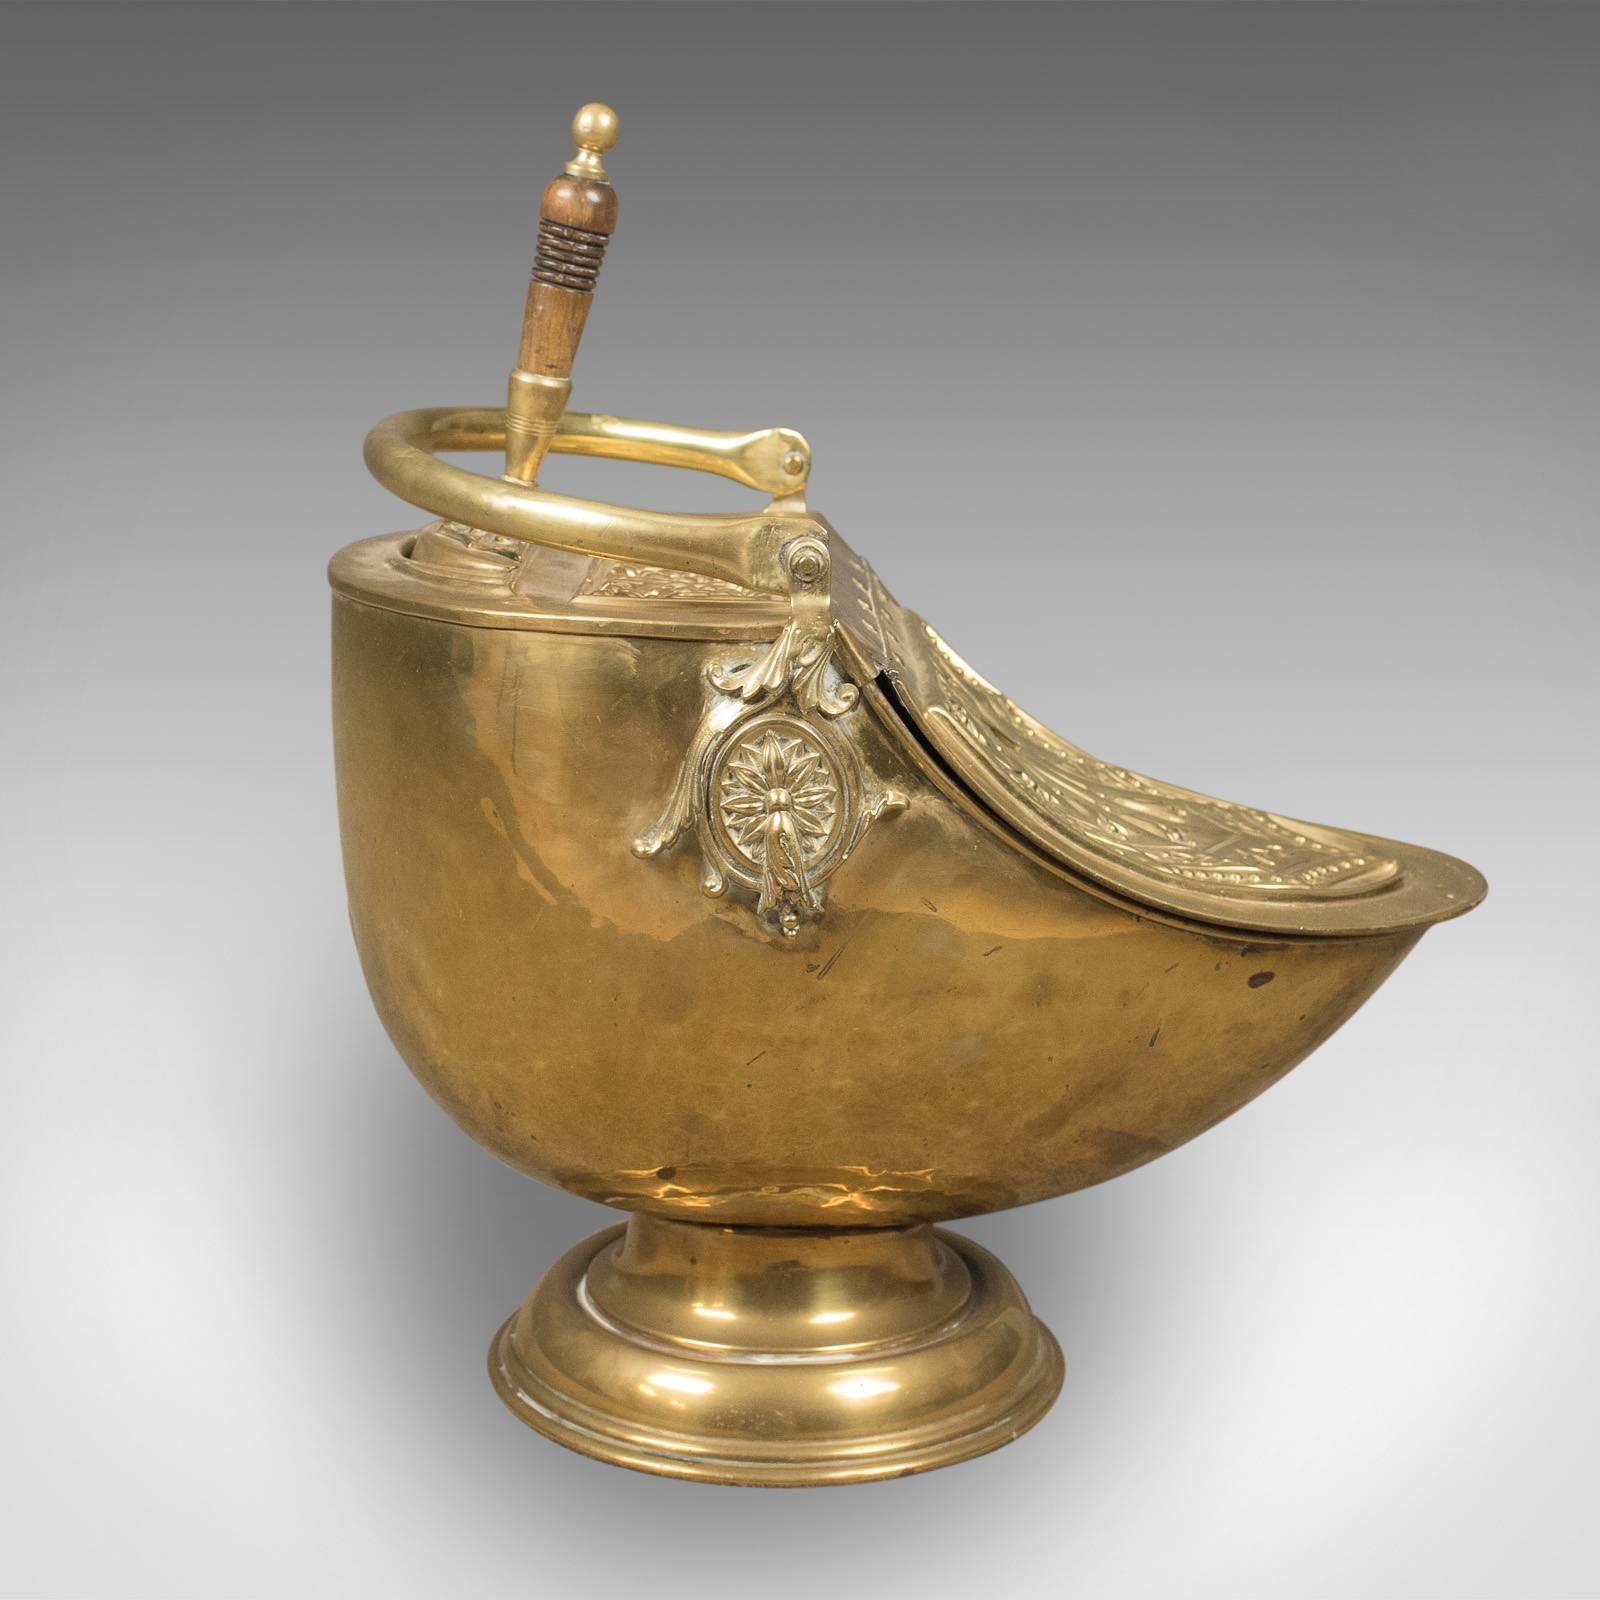 This is a Victorian coal scuttle, a brass fireside piece with integral shovel. English dating to circa 1880.

A pleasing mid-size fireside storage bin presented in good antique condition
Decorated with classical motif and adornment standing upon